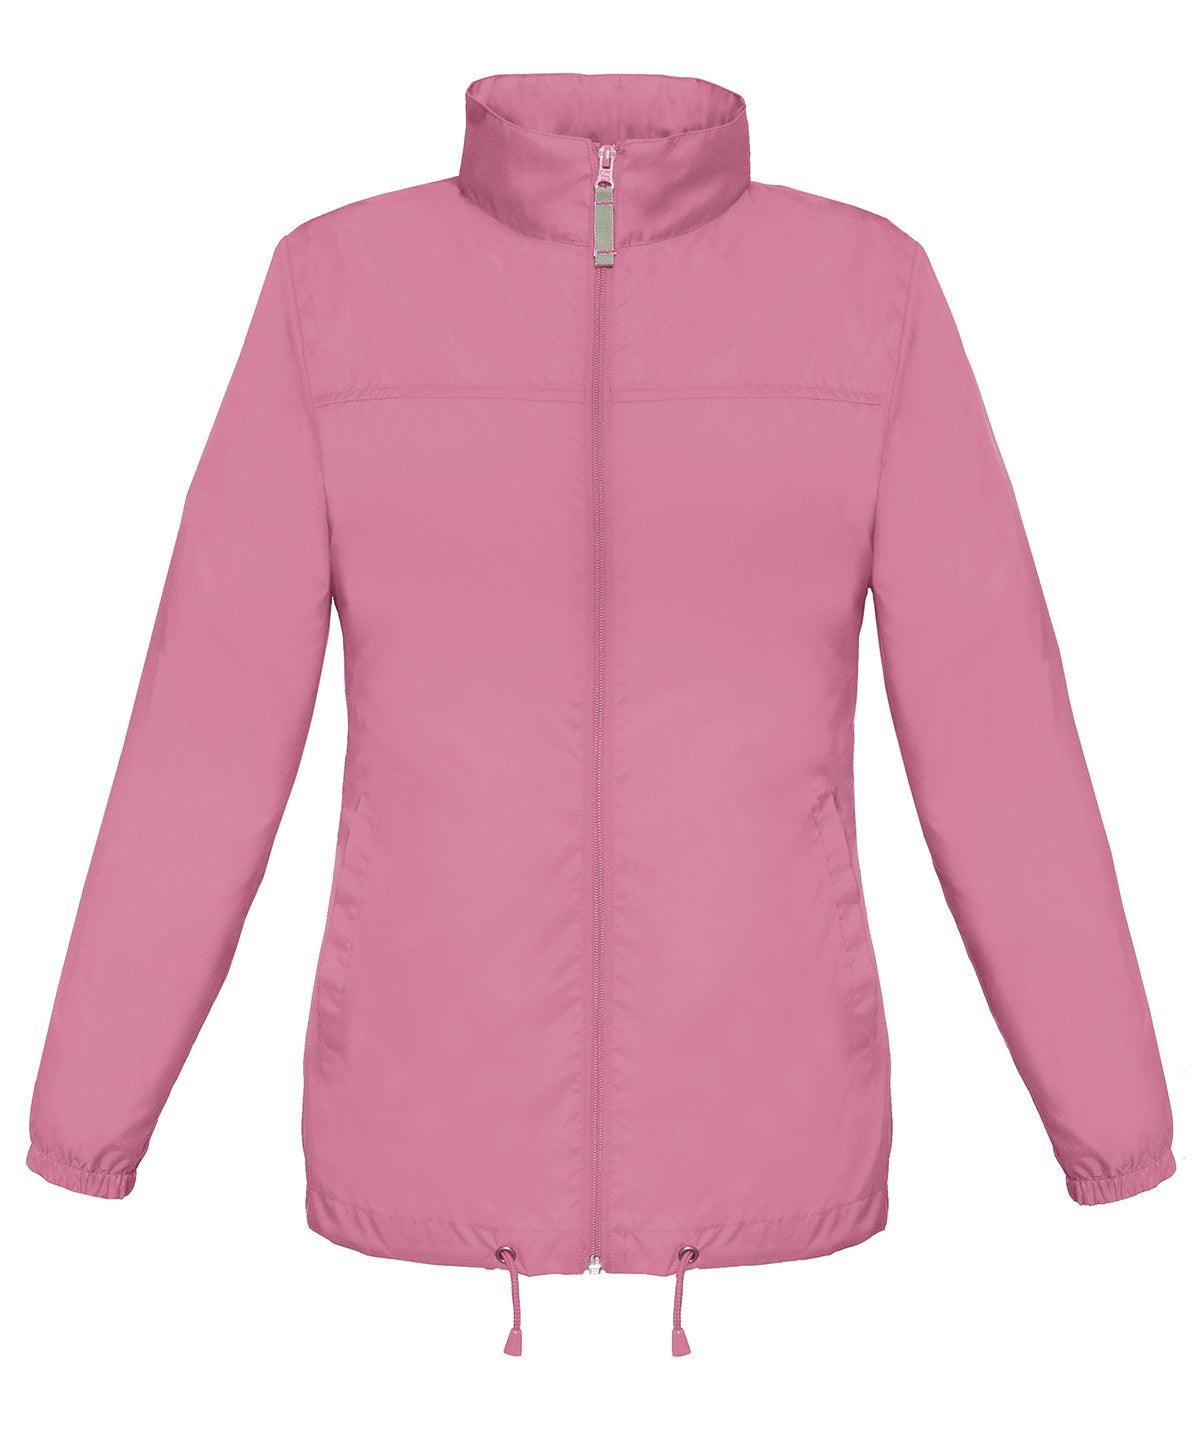 Pixel Pink - B&C Sirocco /women Jackets B&C Collection Jackets & Coats, Women's Fashion Schoolwear Centres